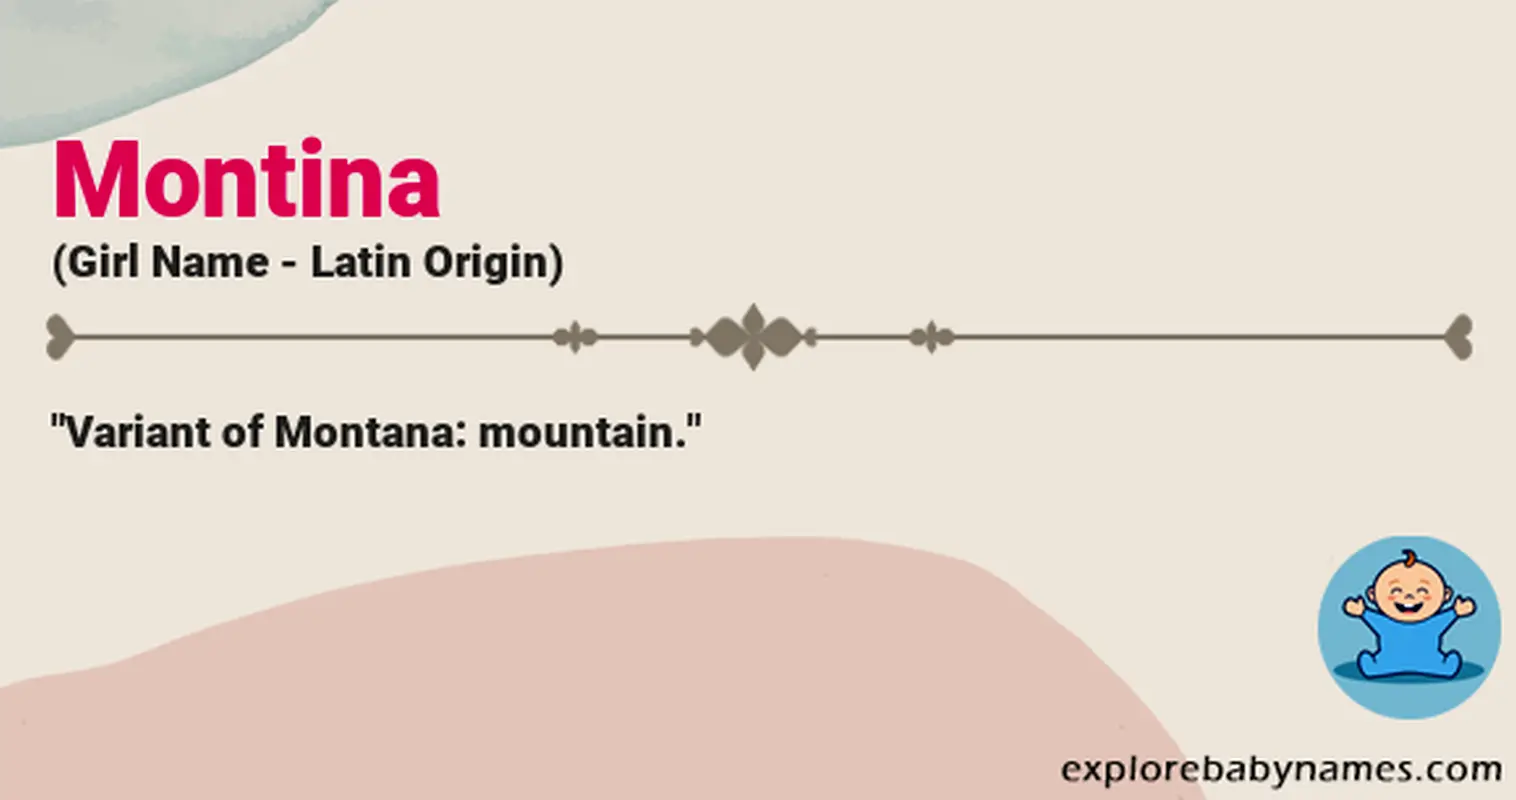 Meaning of Montina